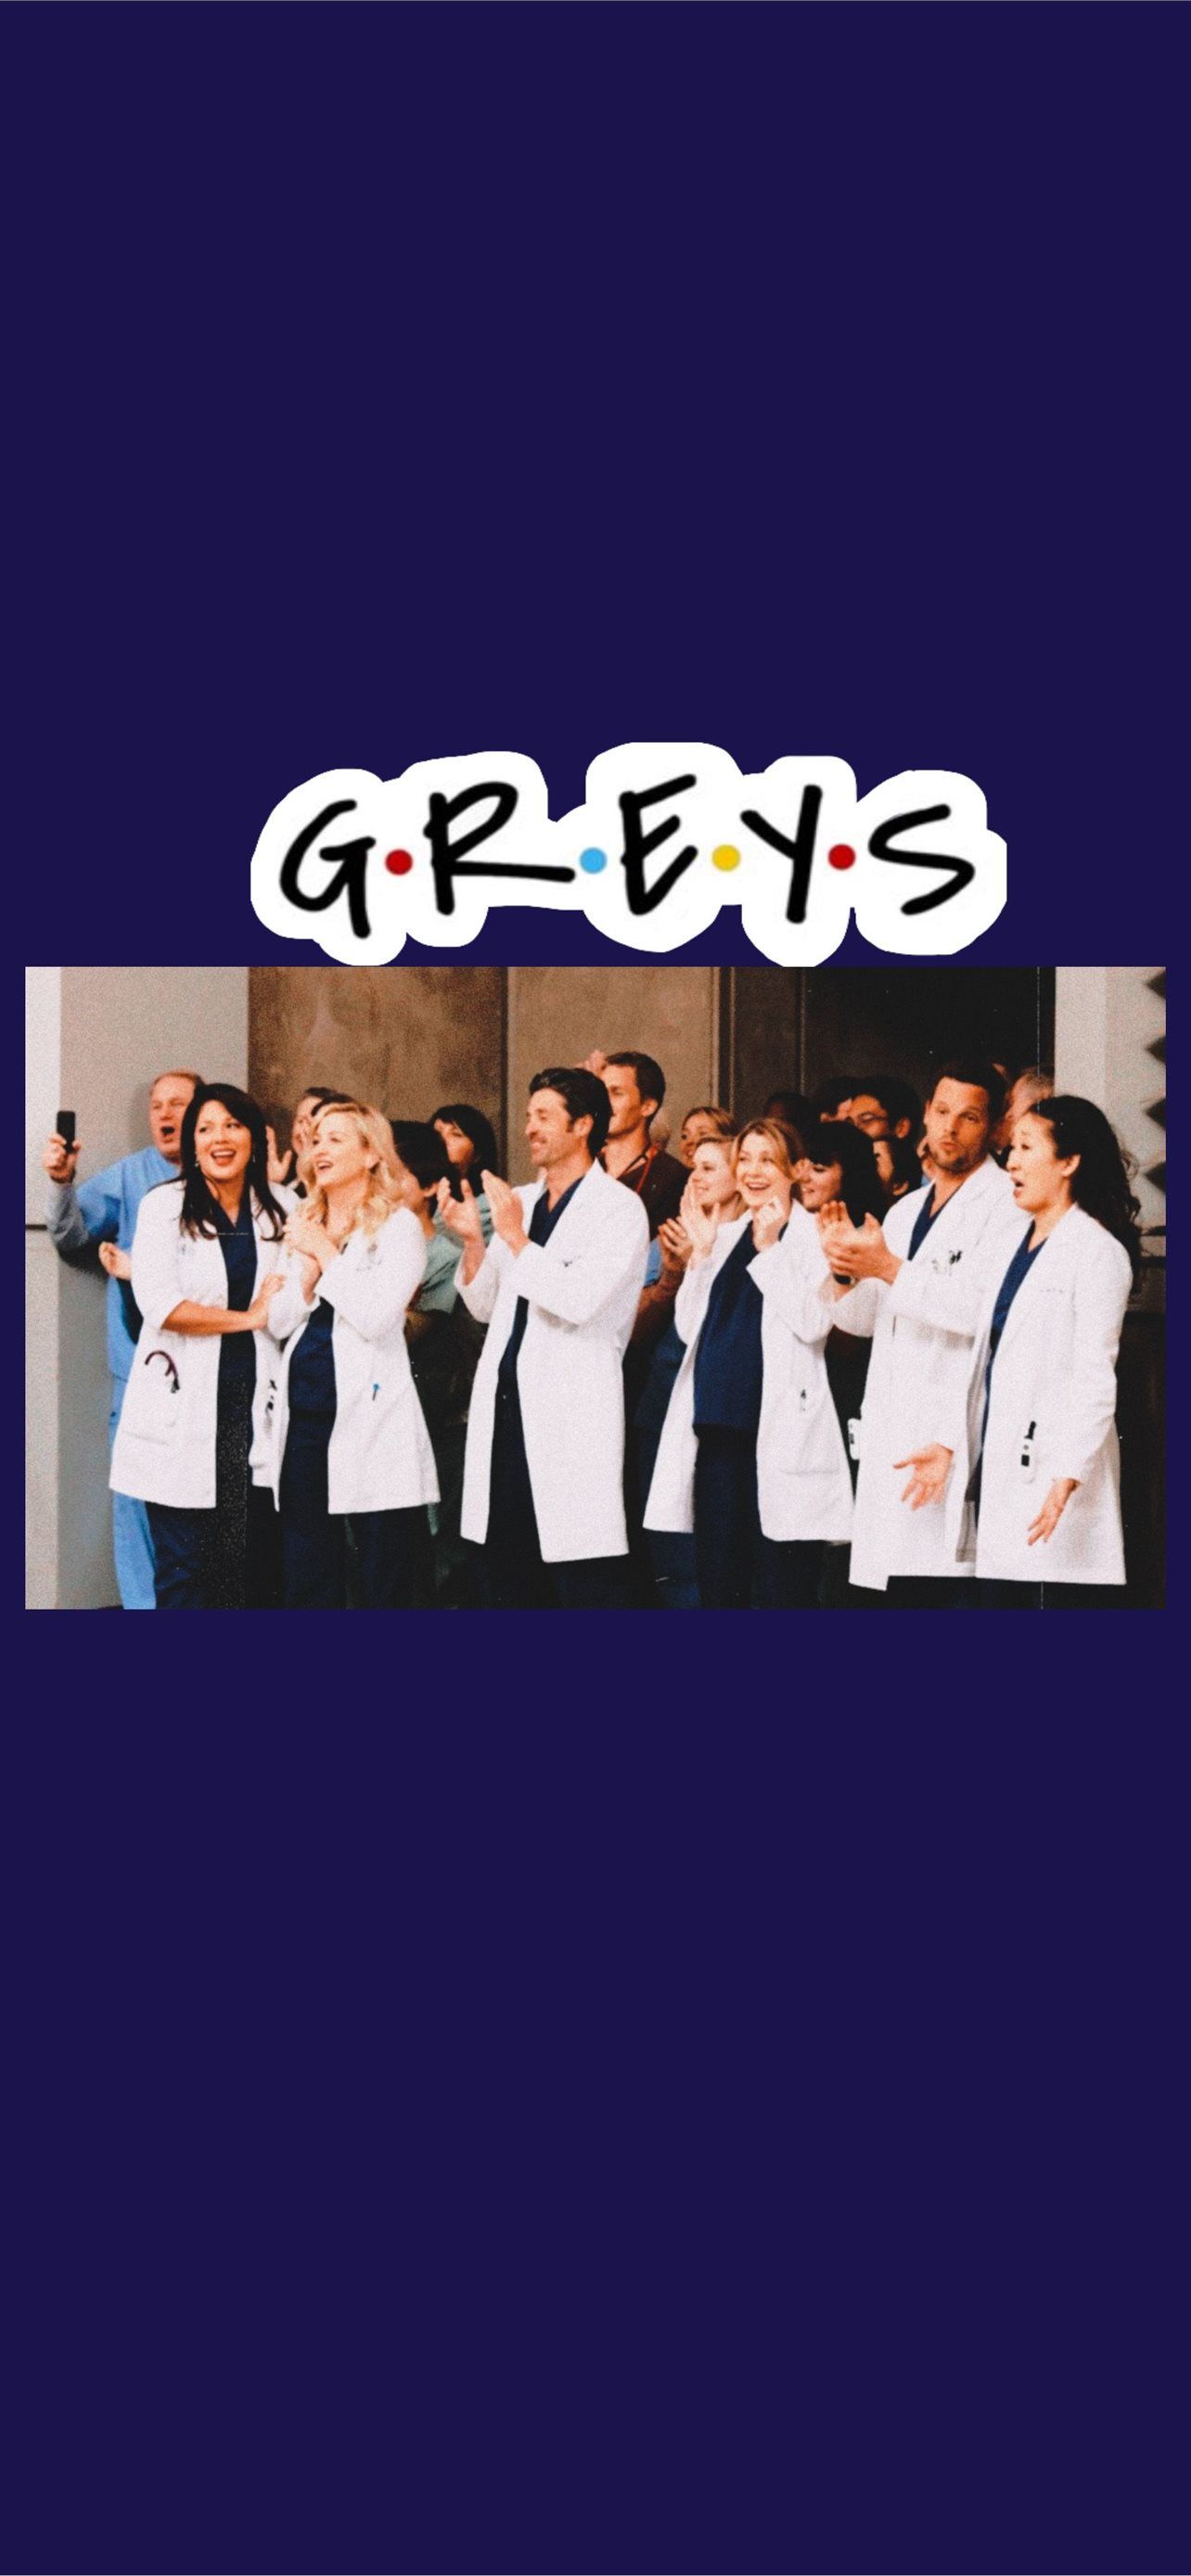 Grey's Anatomy in 2021 iPhone Wallpaper Free Download